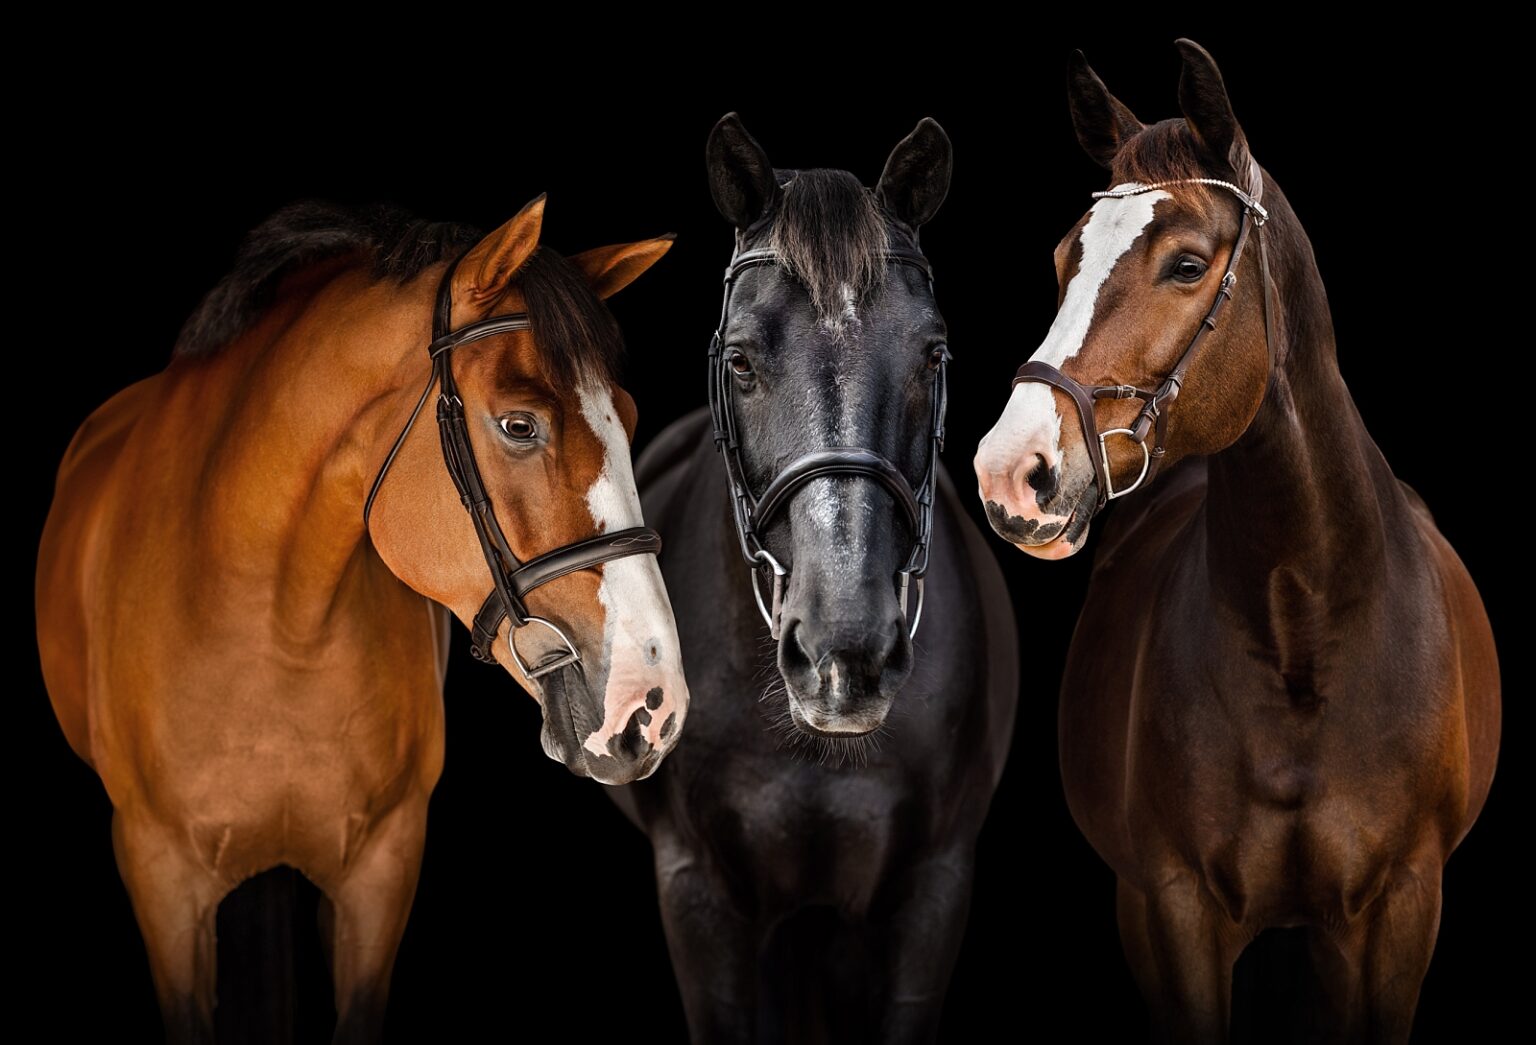 Fine art equine photographer near Tallahassee FL. Black background equine photo with multiple horses.